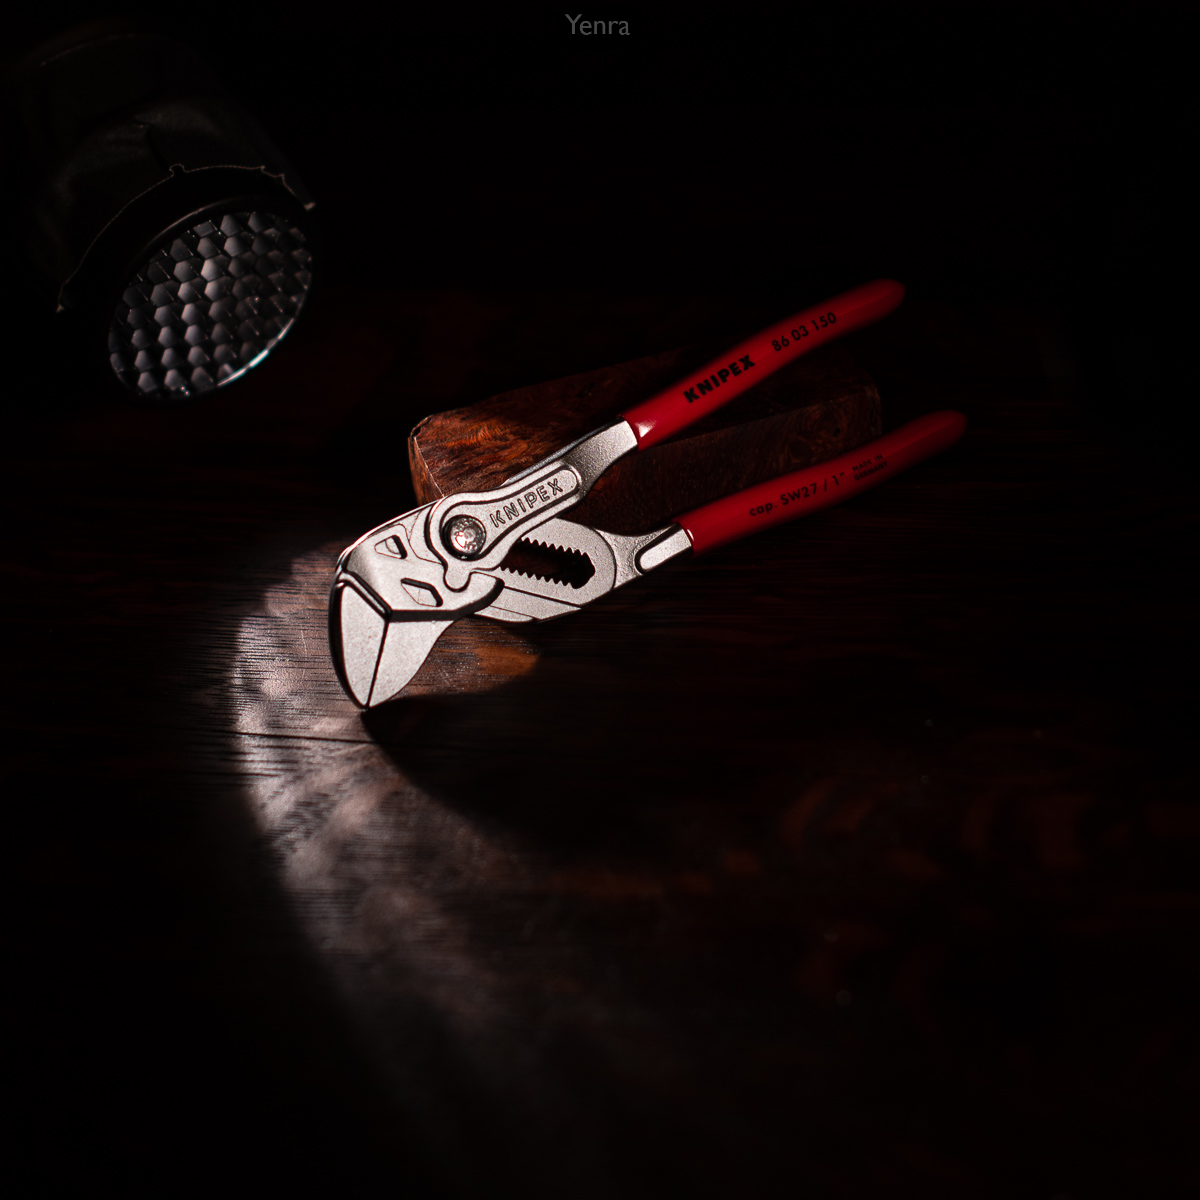 Backlighting Knipex Pliers with a Snoot